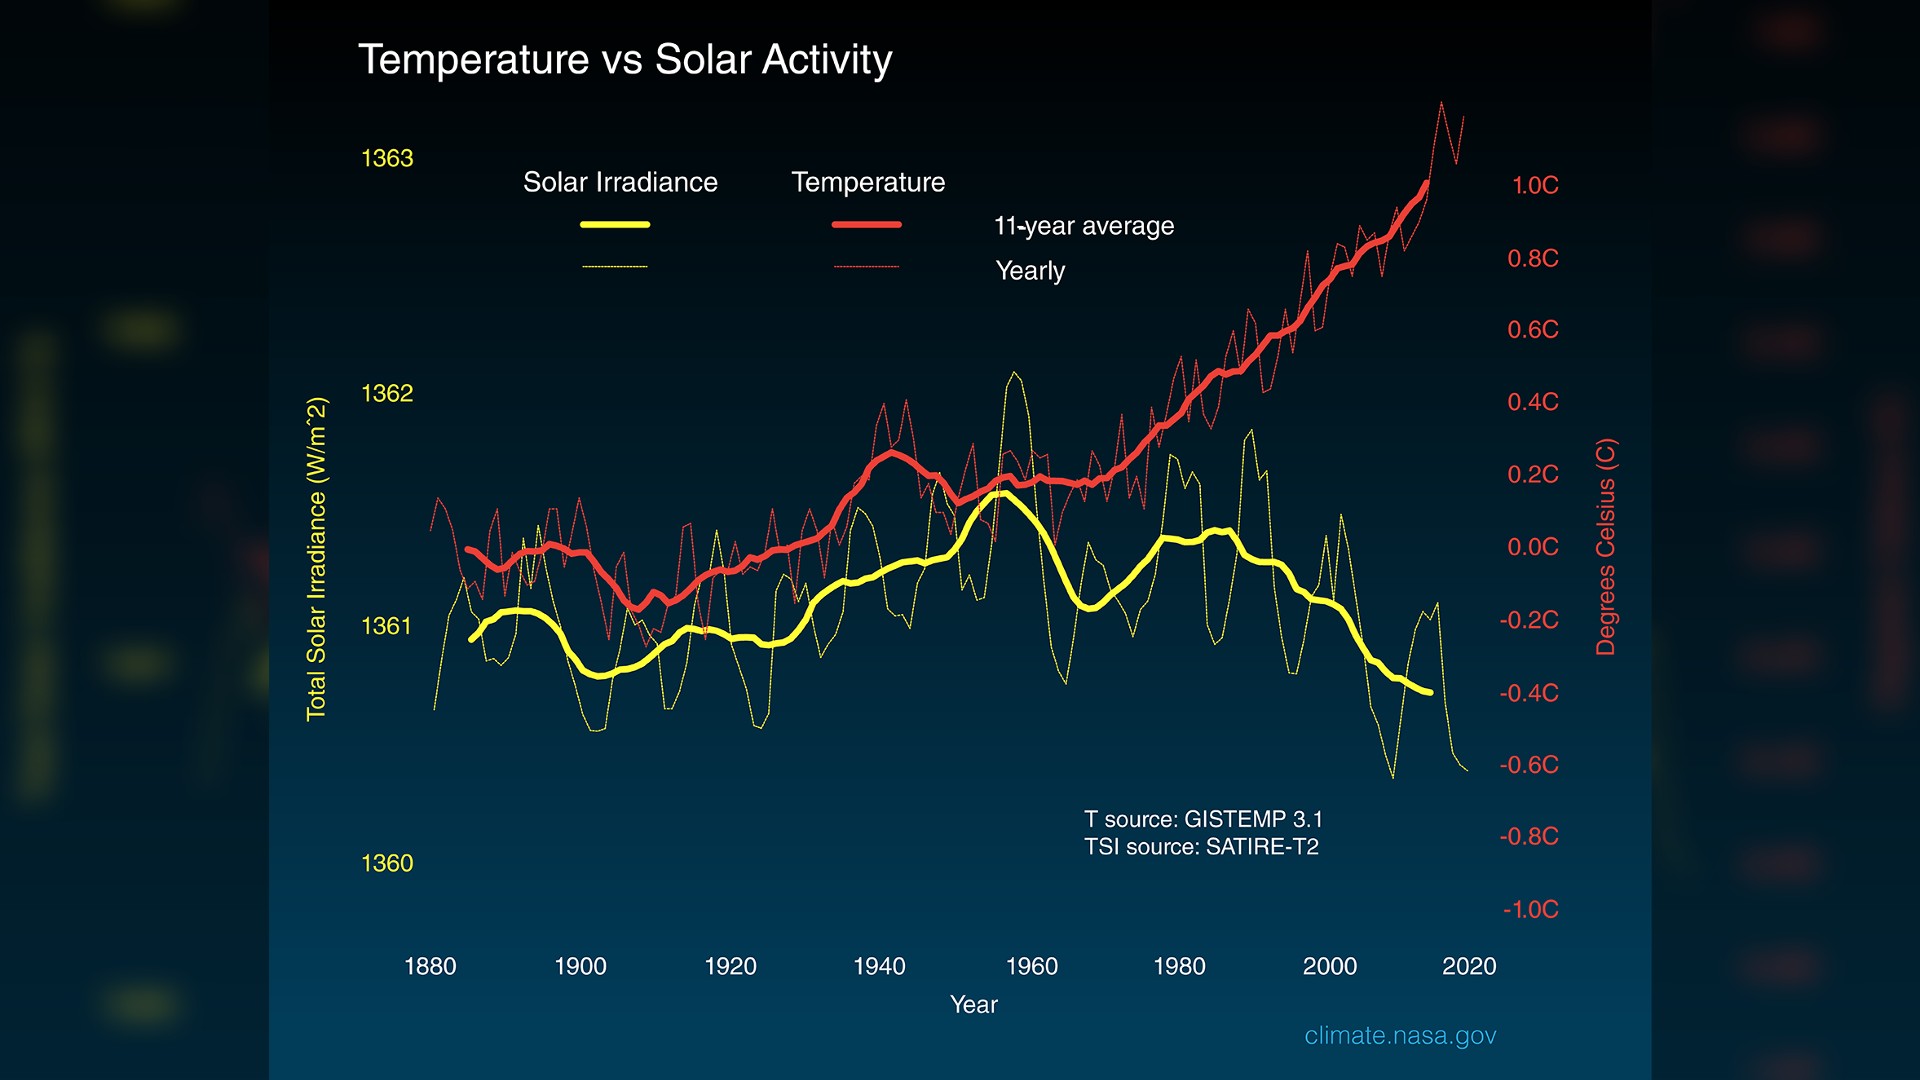 Changes in Earth's surface temperature (red line) compared to the Sun's energy received by the Earth (yellow line) in watts (energy units) per square meter since 1880.